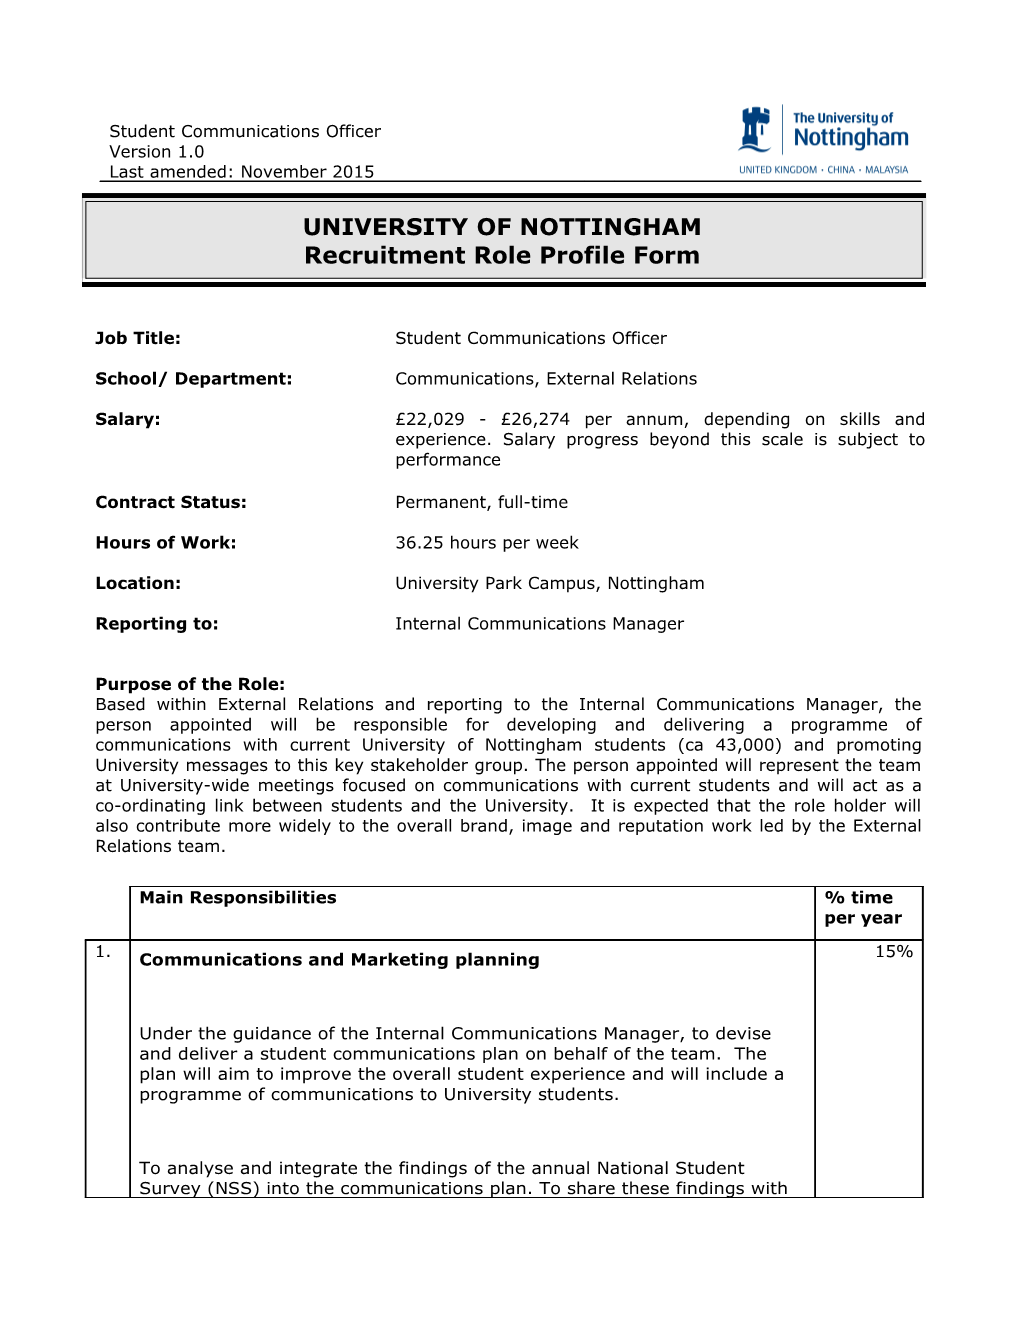 Job Title: Student Communications Officer